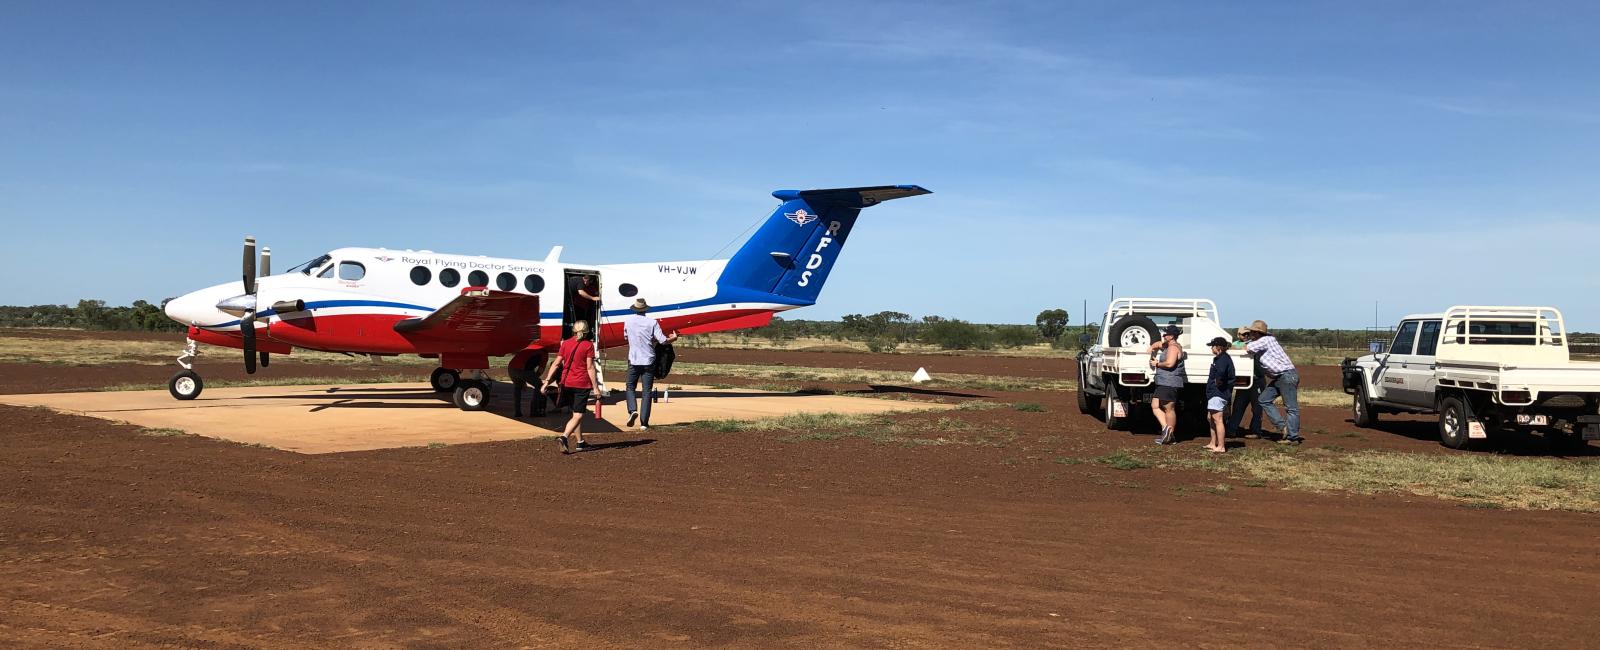 RFDS plane picking up a patient on a red dirt runway with two cars nearby